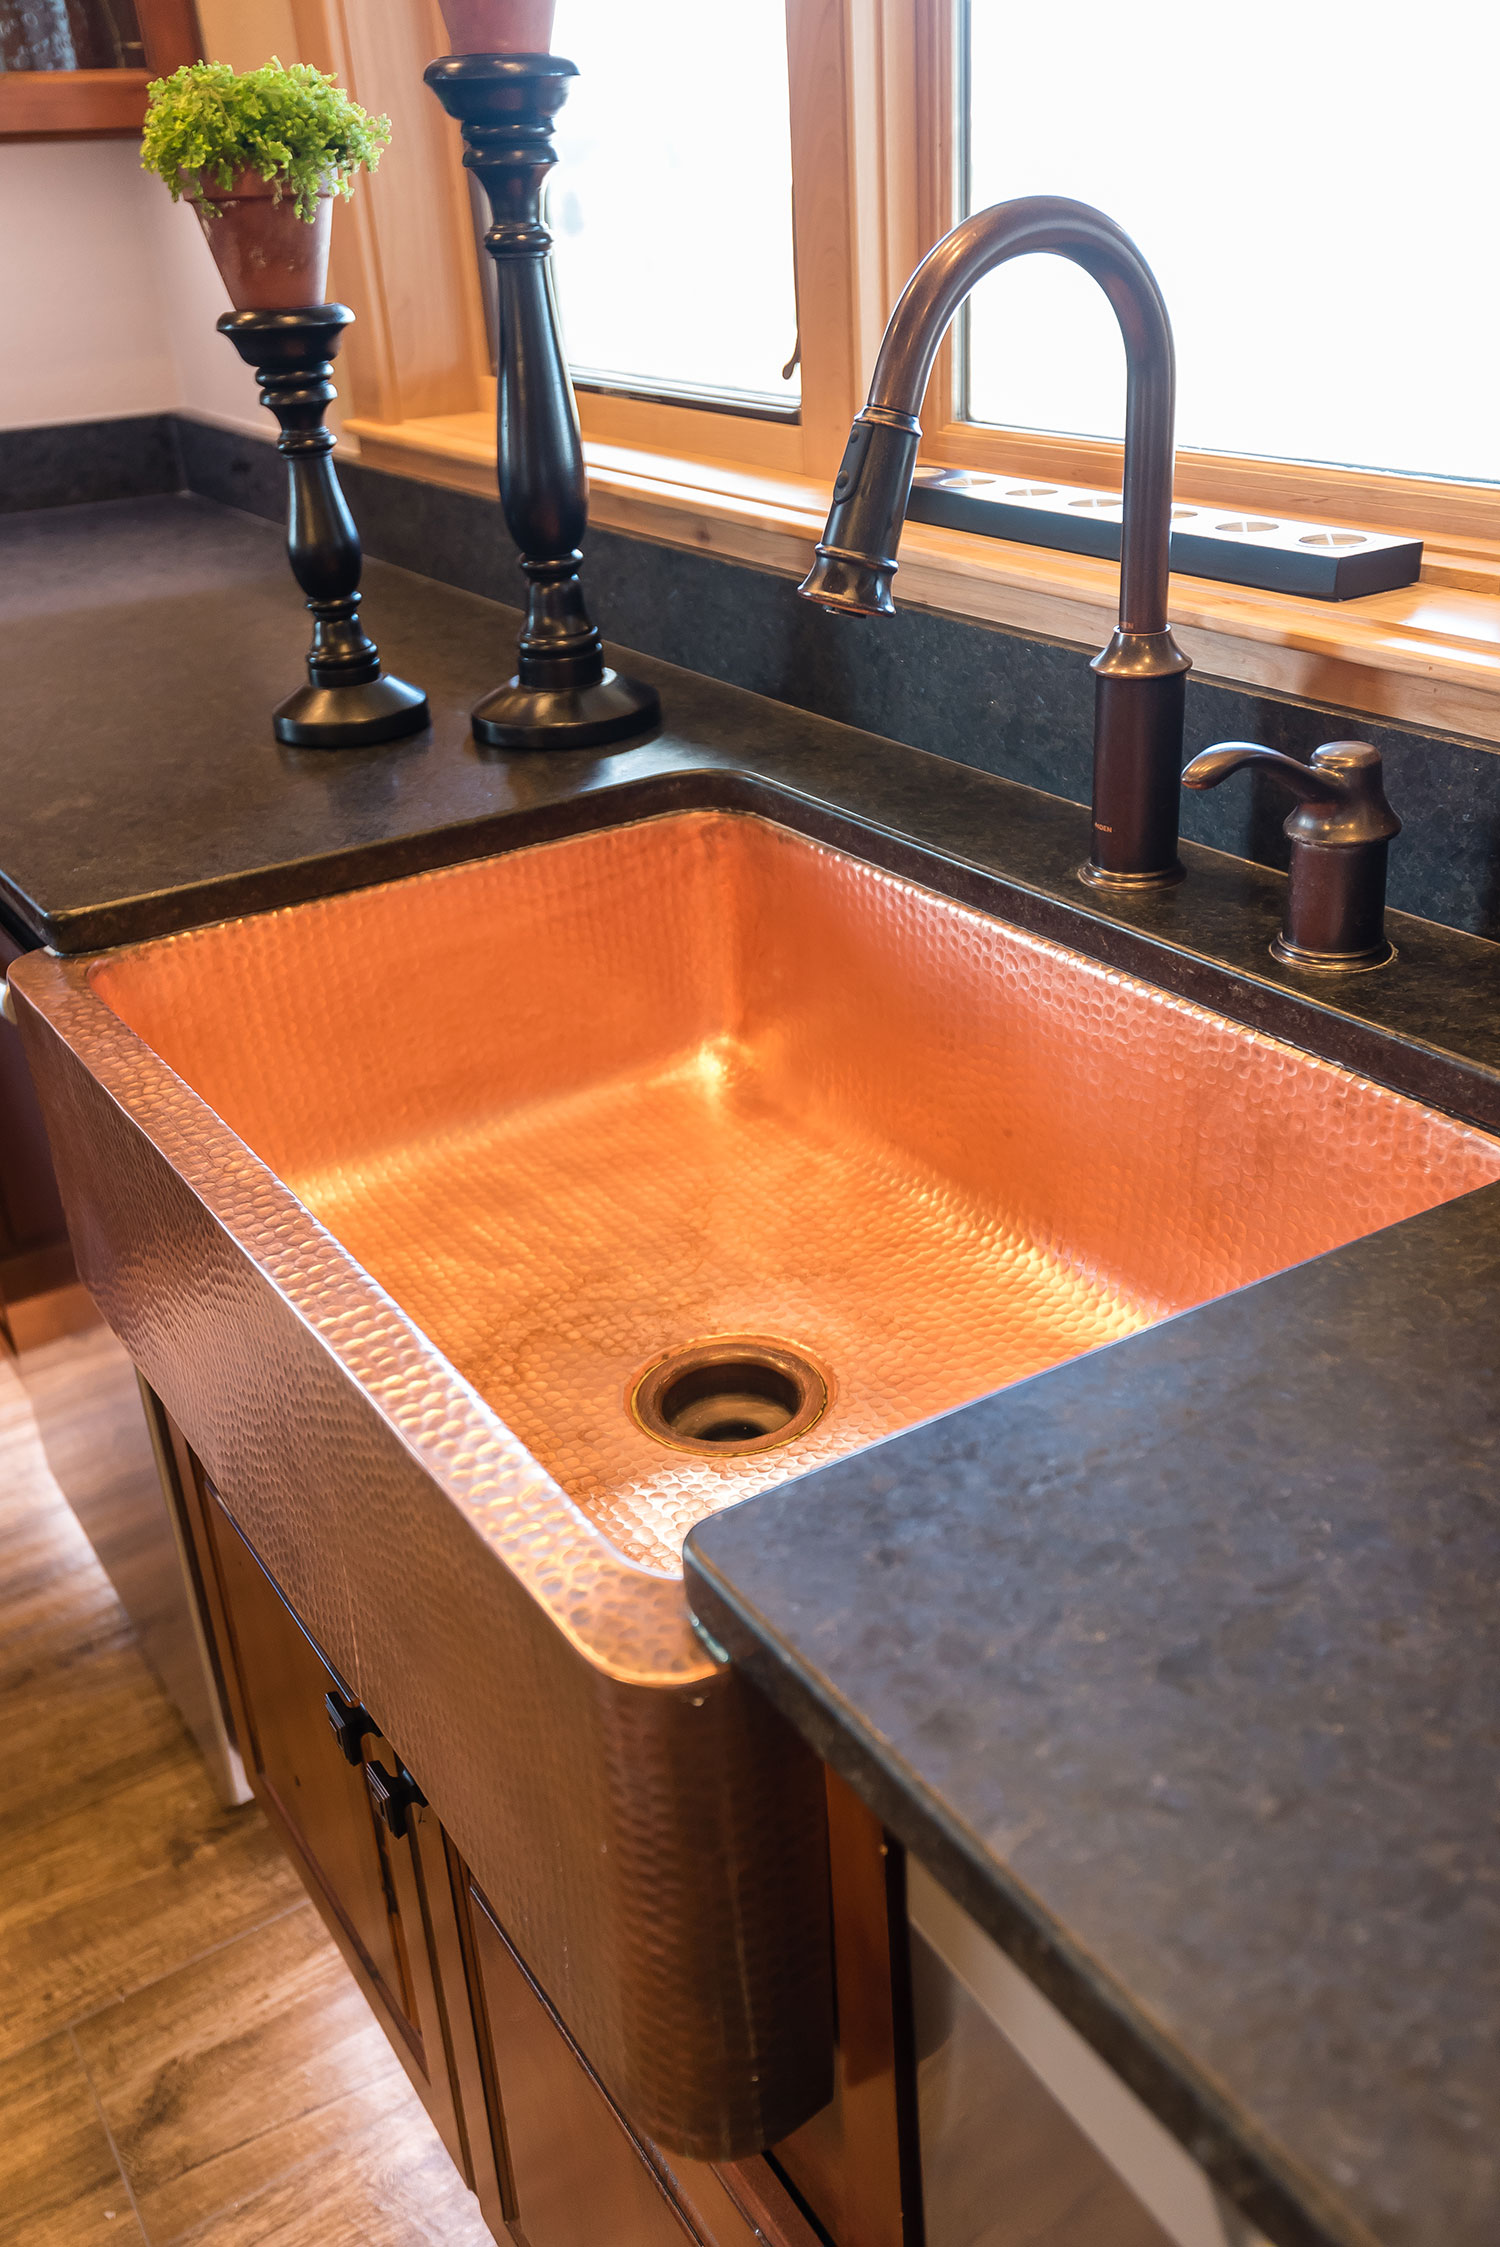 Copper farmhouse sink set in black granite countertop with rubbed bronze faucet and candles below a window